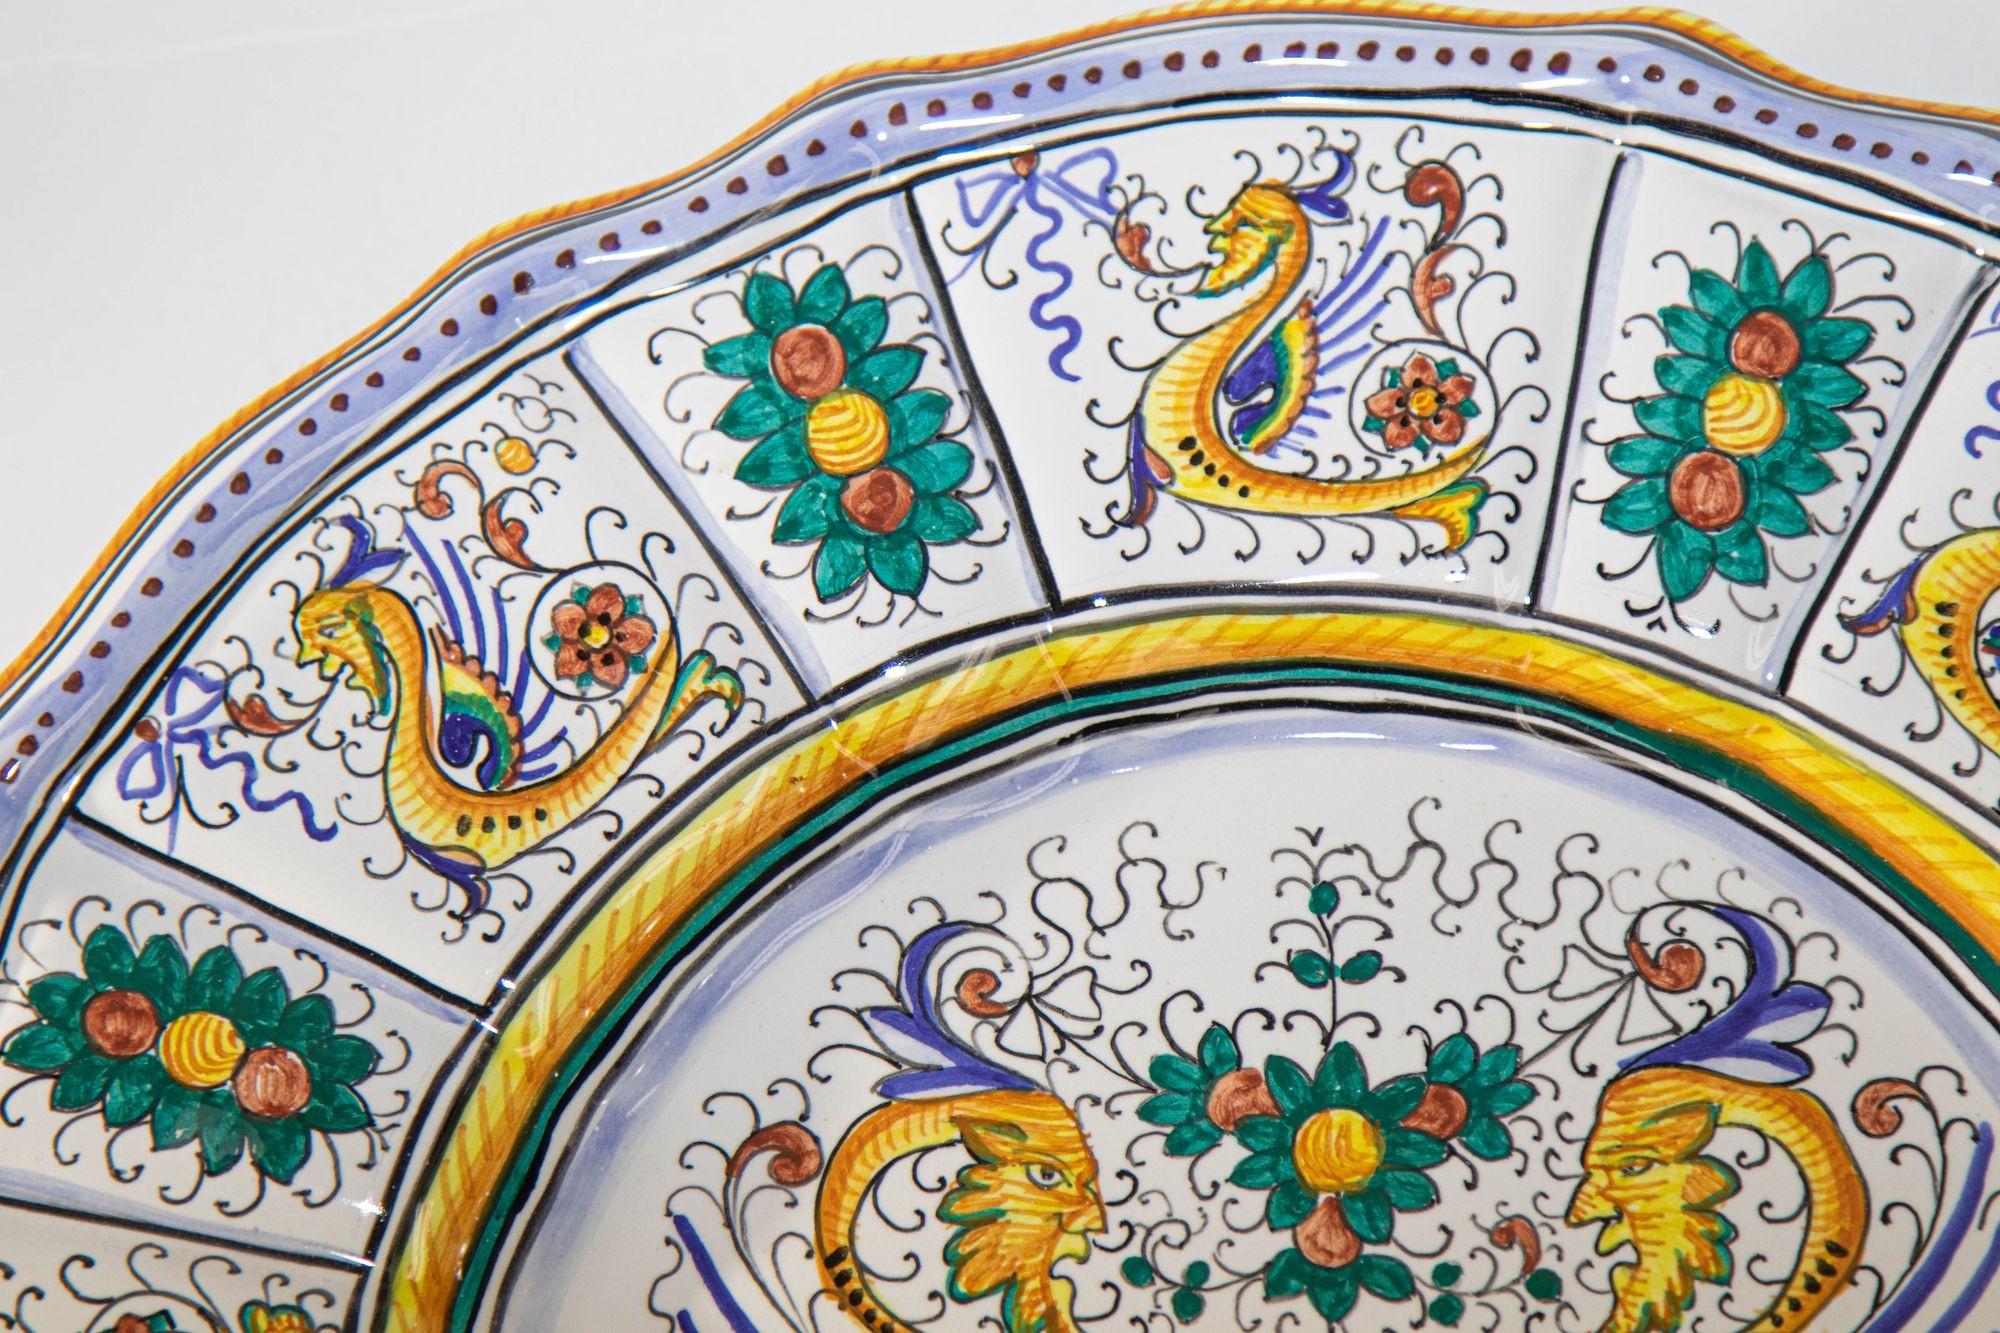 A large vintage Deruta Raffaellesco decorative wall plate with scalloped rim.
Majolica hand-painted with magnificent detailing and artwork, extraordinary level of detail, evoking the splendors of the Golden Age of Italian ceramics.
The Deruta